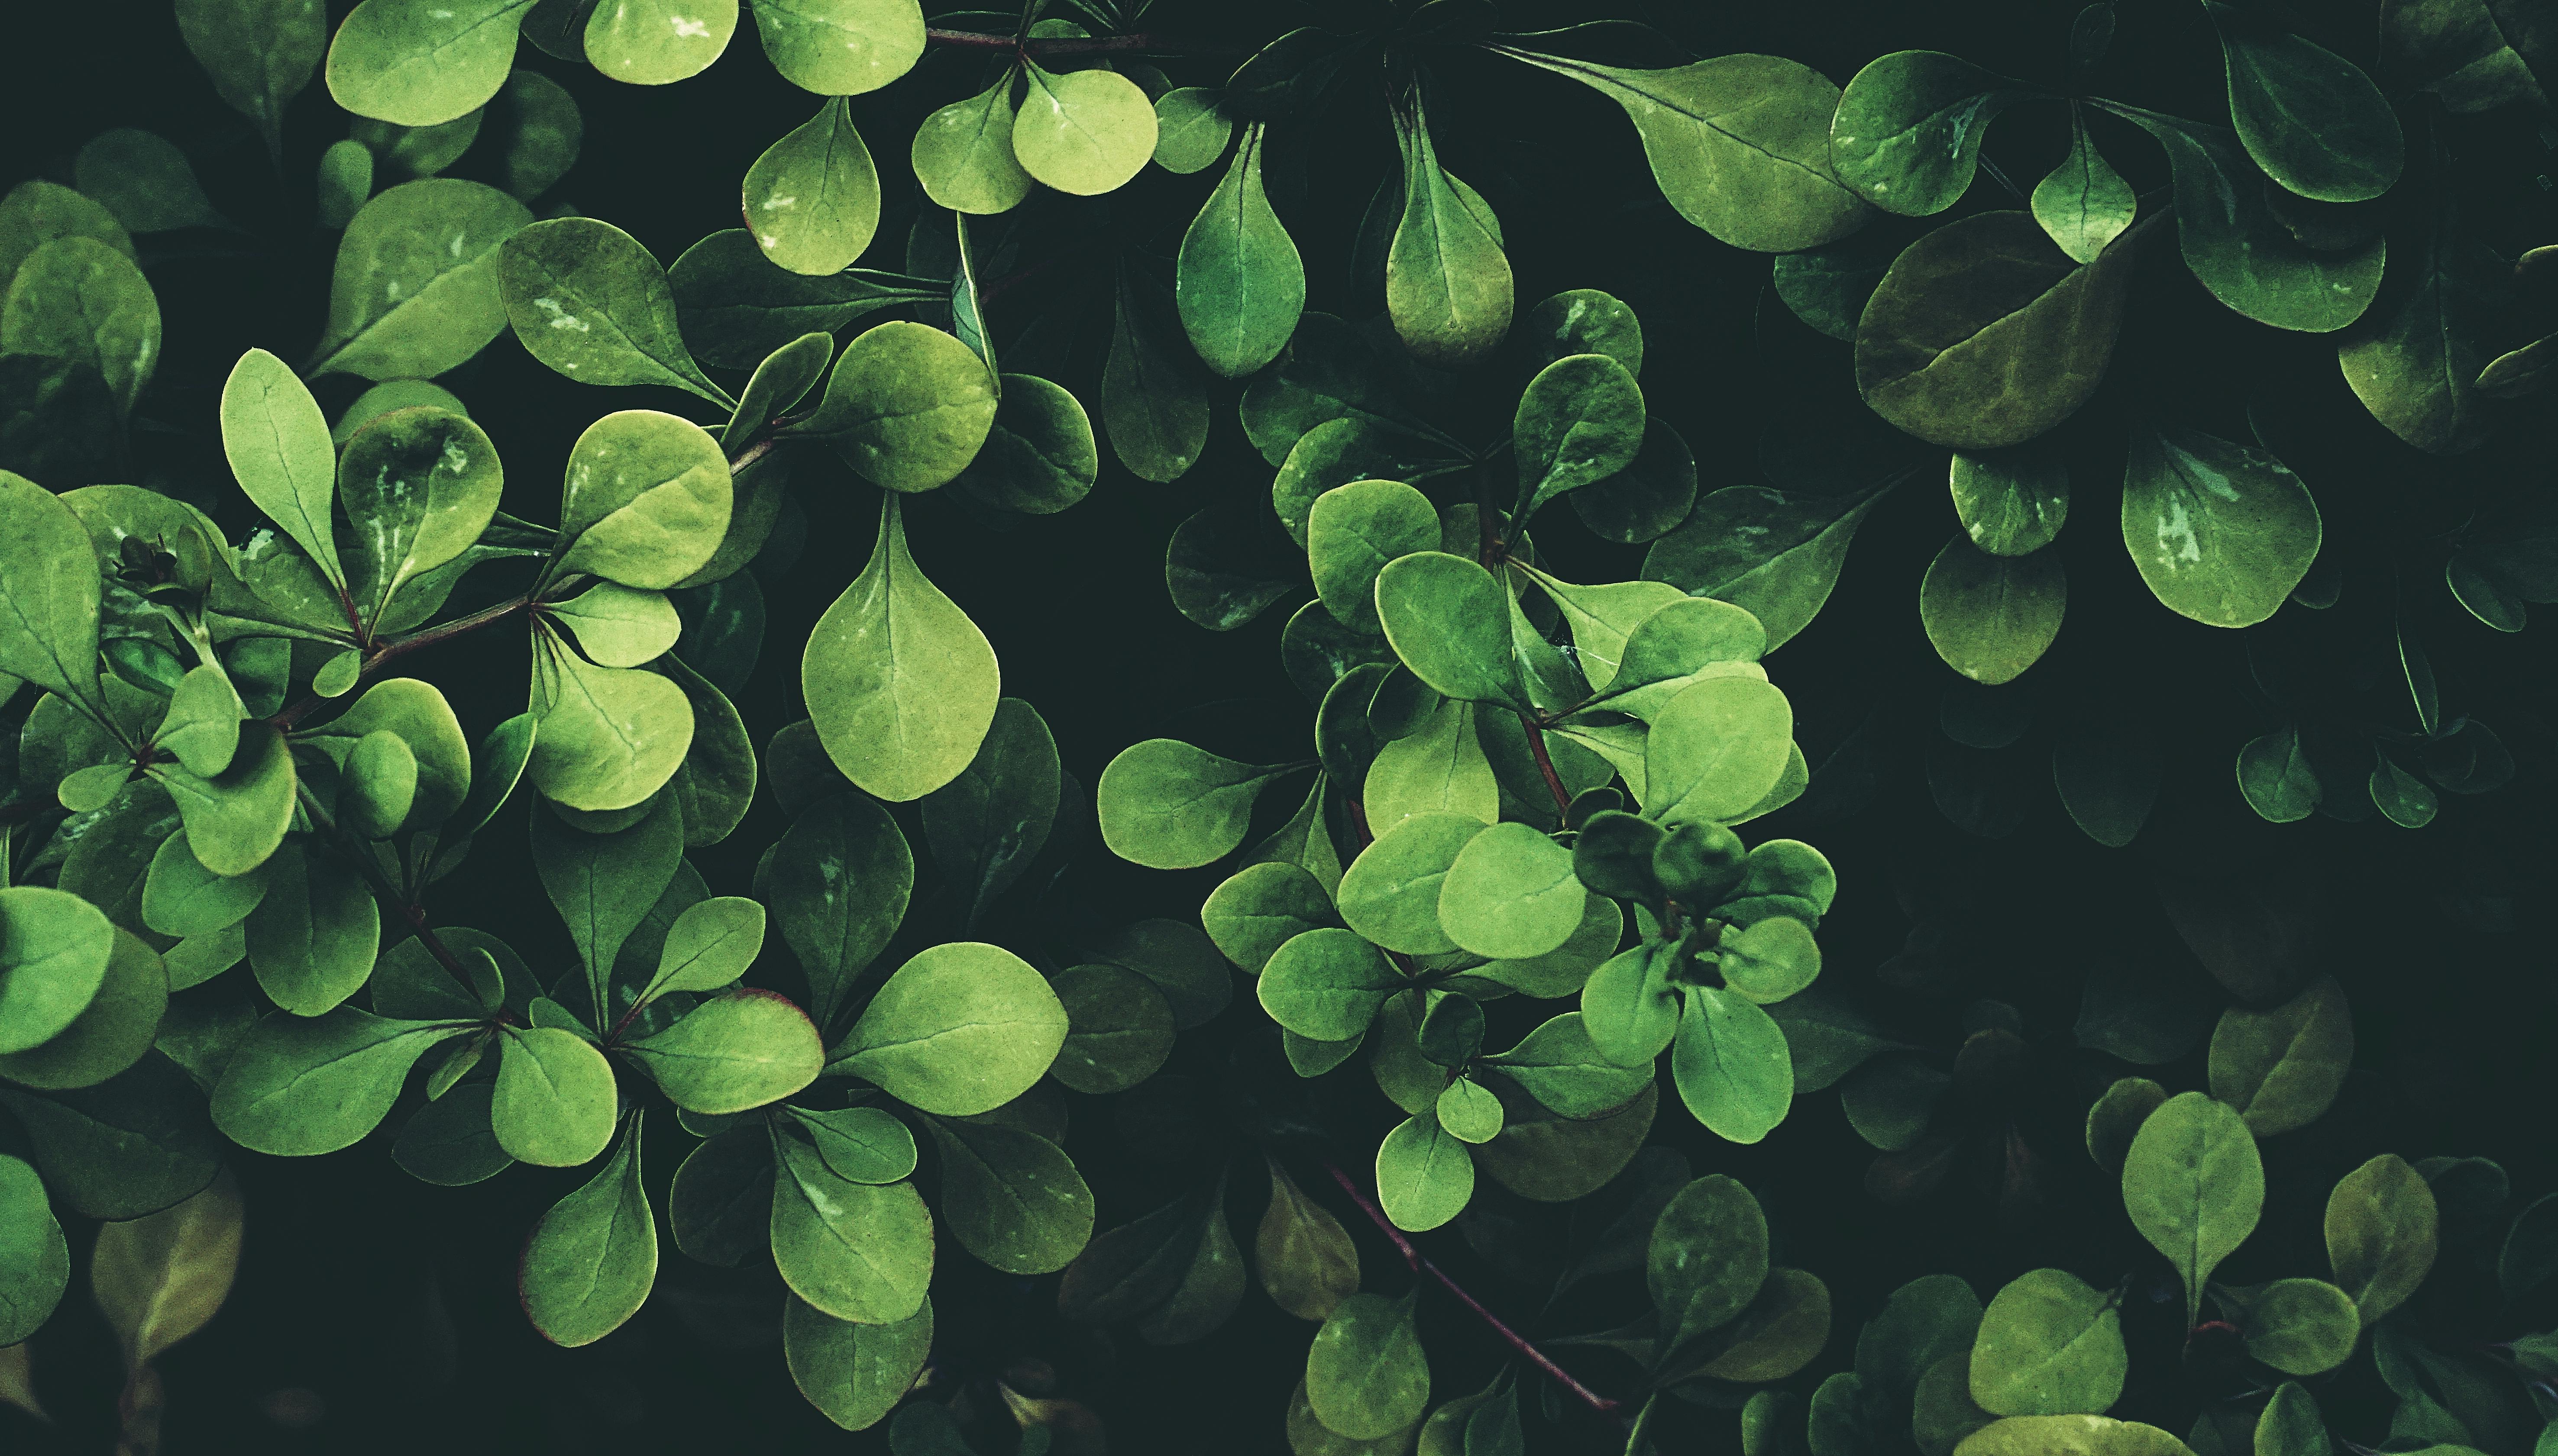 Green Leaf Photos Download The BEST Free Green Leaf Stock Photos  HD  Images